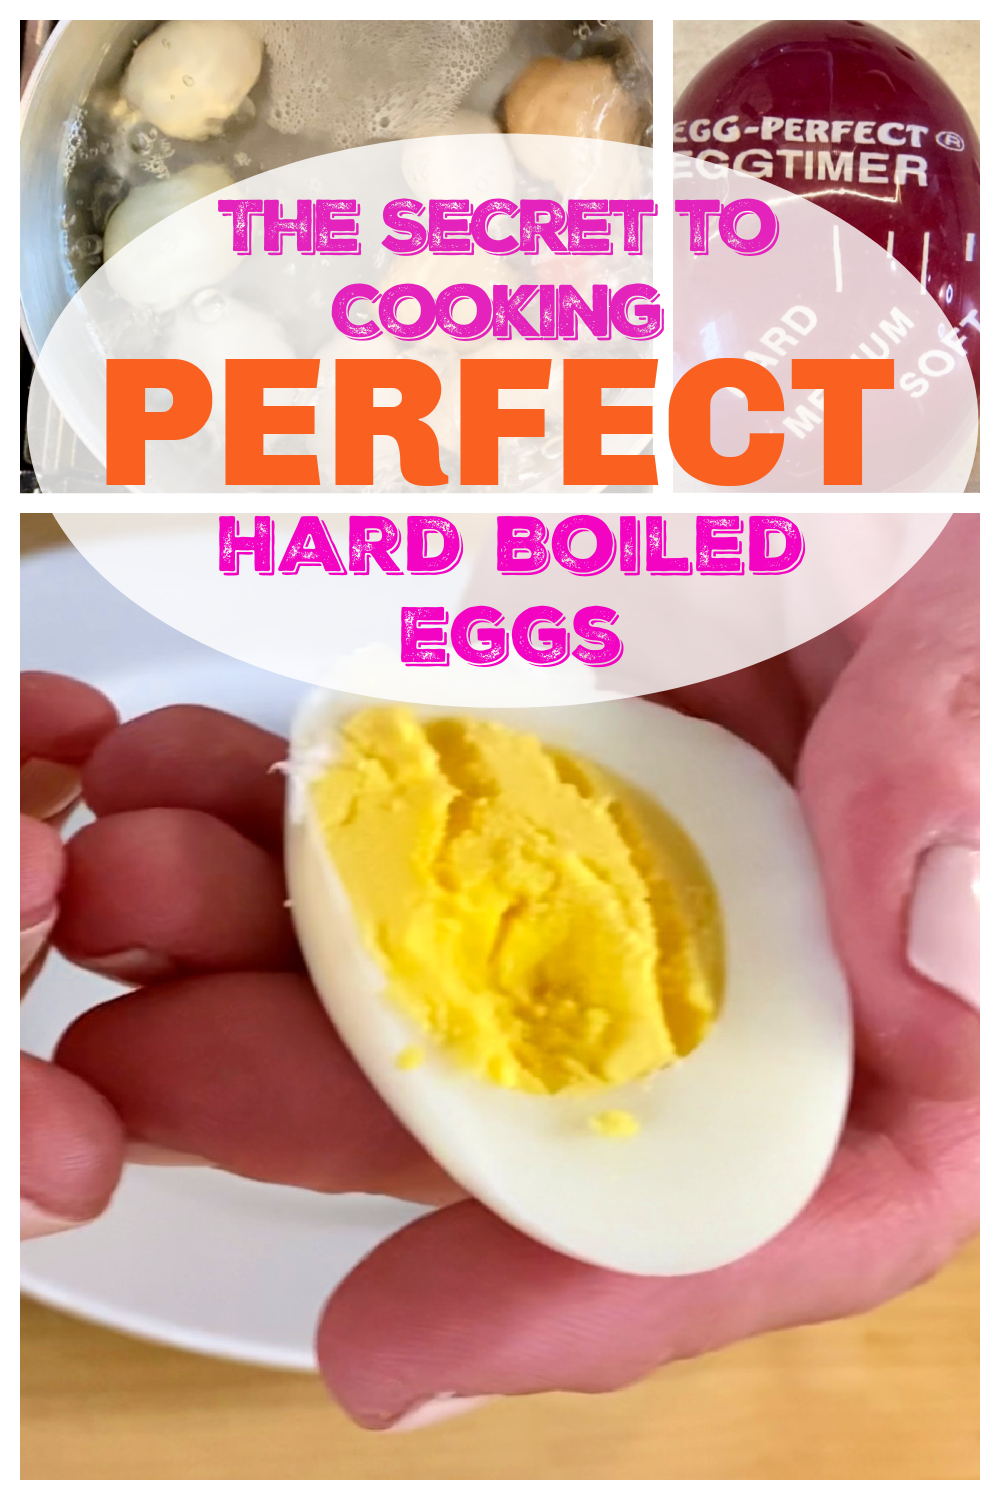 the secret to cooking perfect hard boiled eggs